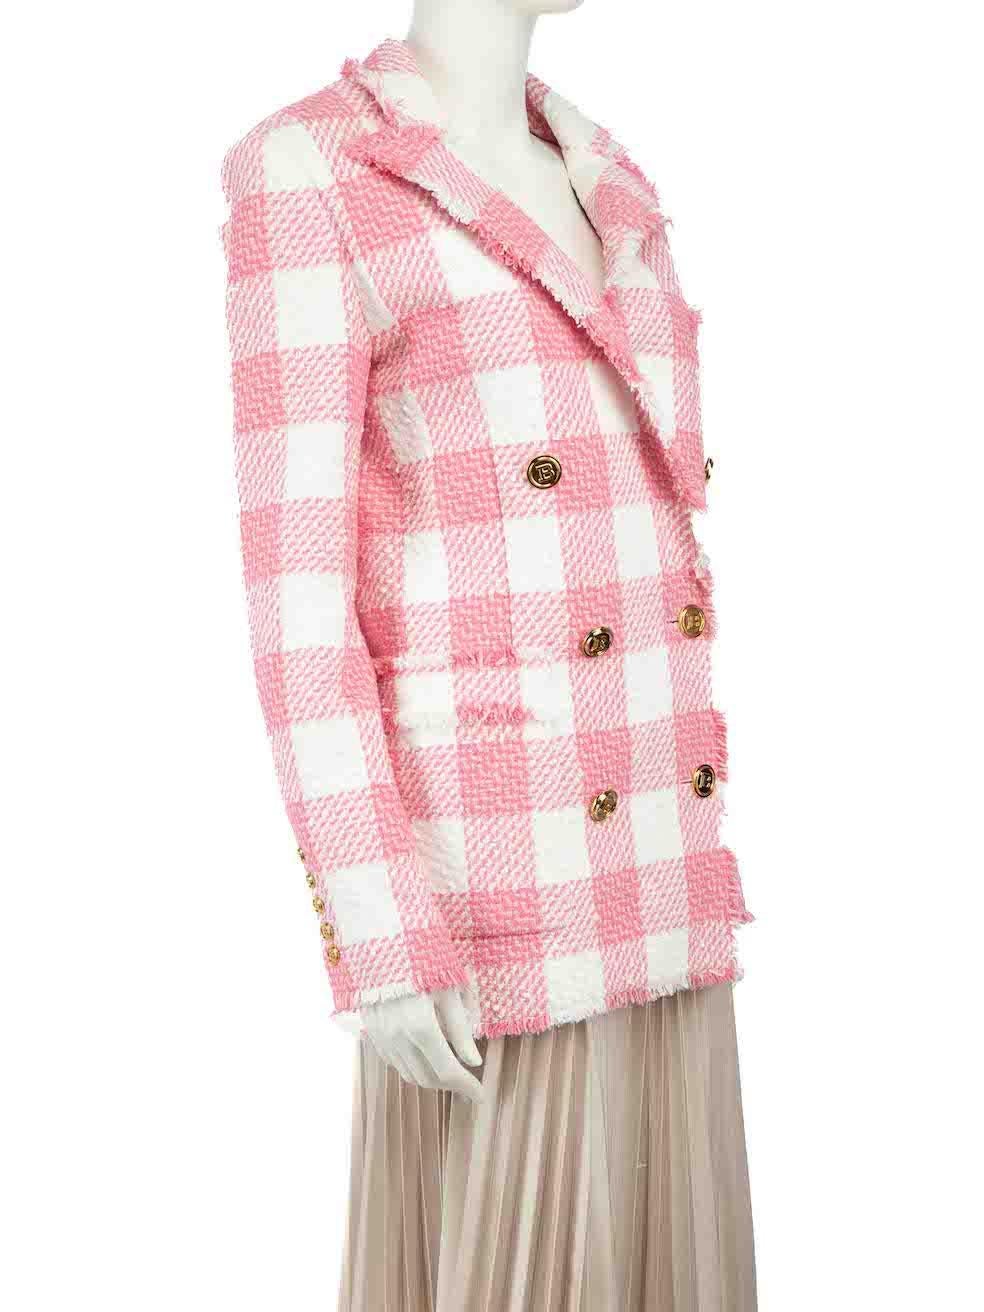 CONDITION is Very good. Hardly any visible wear to blazer is evident on this used Balmain designer resale item.
 
 
 
 Details
 
 
 Pink
 
 Tweed
 
 Mid length blazer
 
 Gingham pattern
 
 B initial buttons
 
 Double breasted
 
 Buttoned cuffs
 
